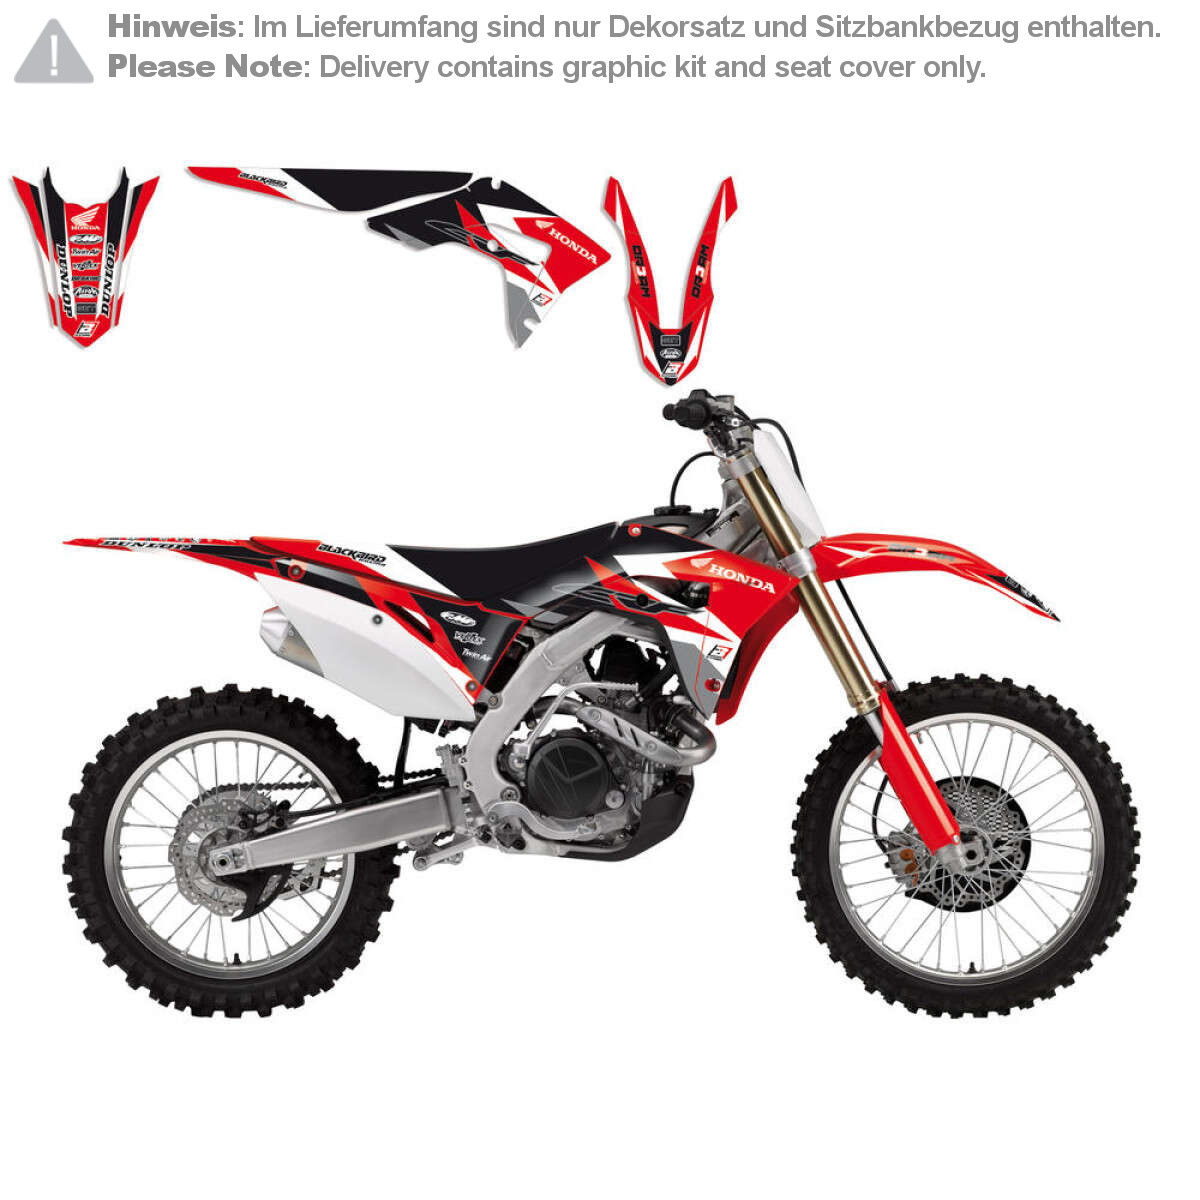 Blackbird Racing Graphic Kit with Seat Cover Dream 3 Honda CRF 450 17-20, CRF 250 18-20